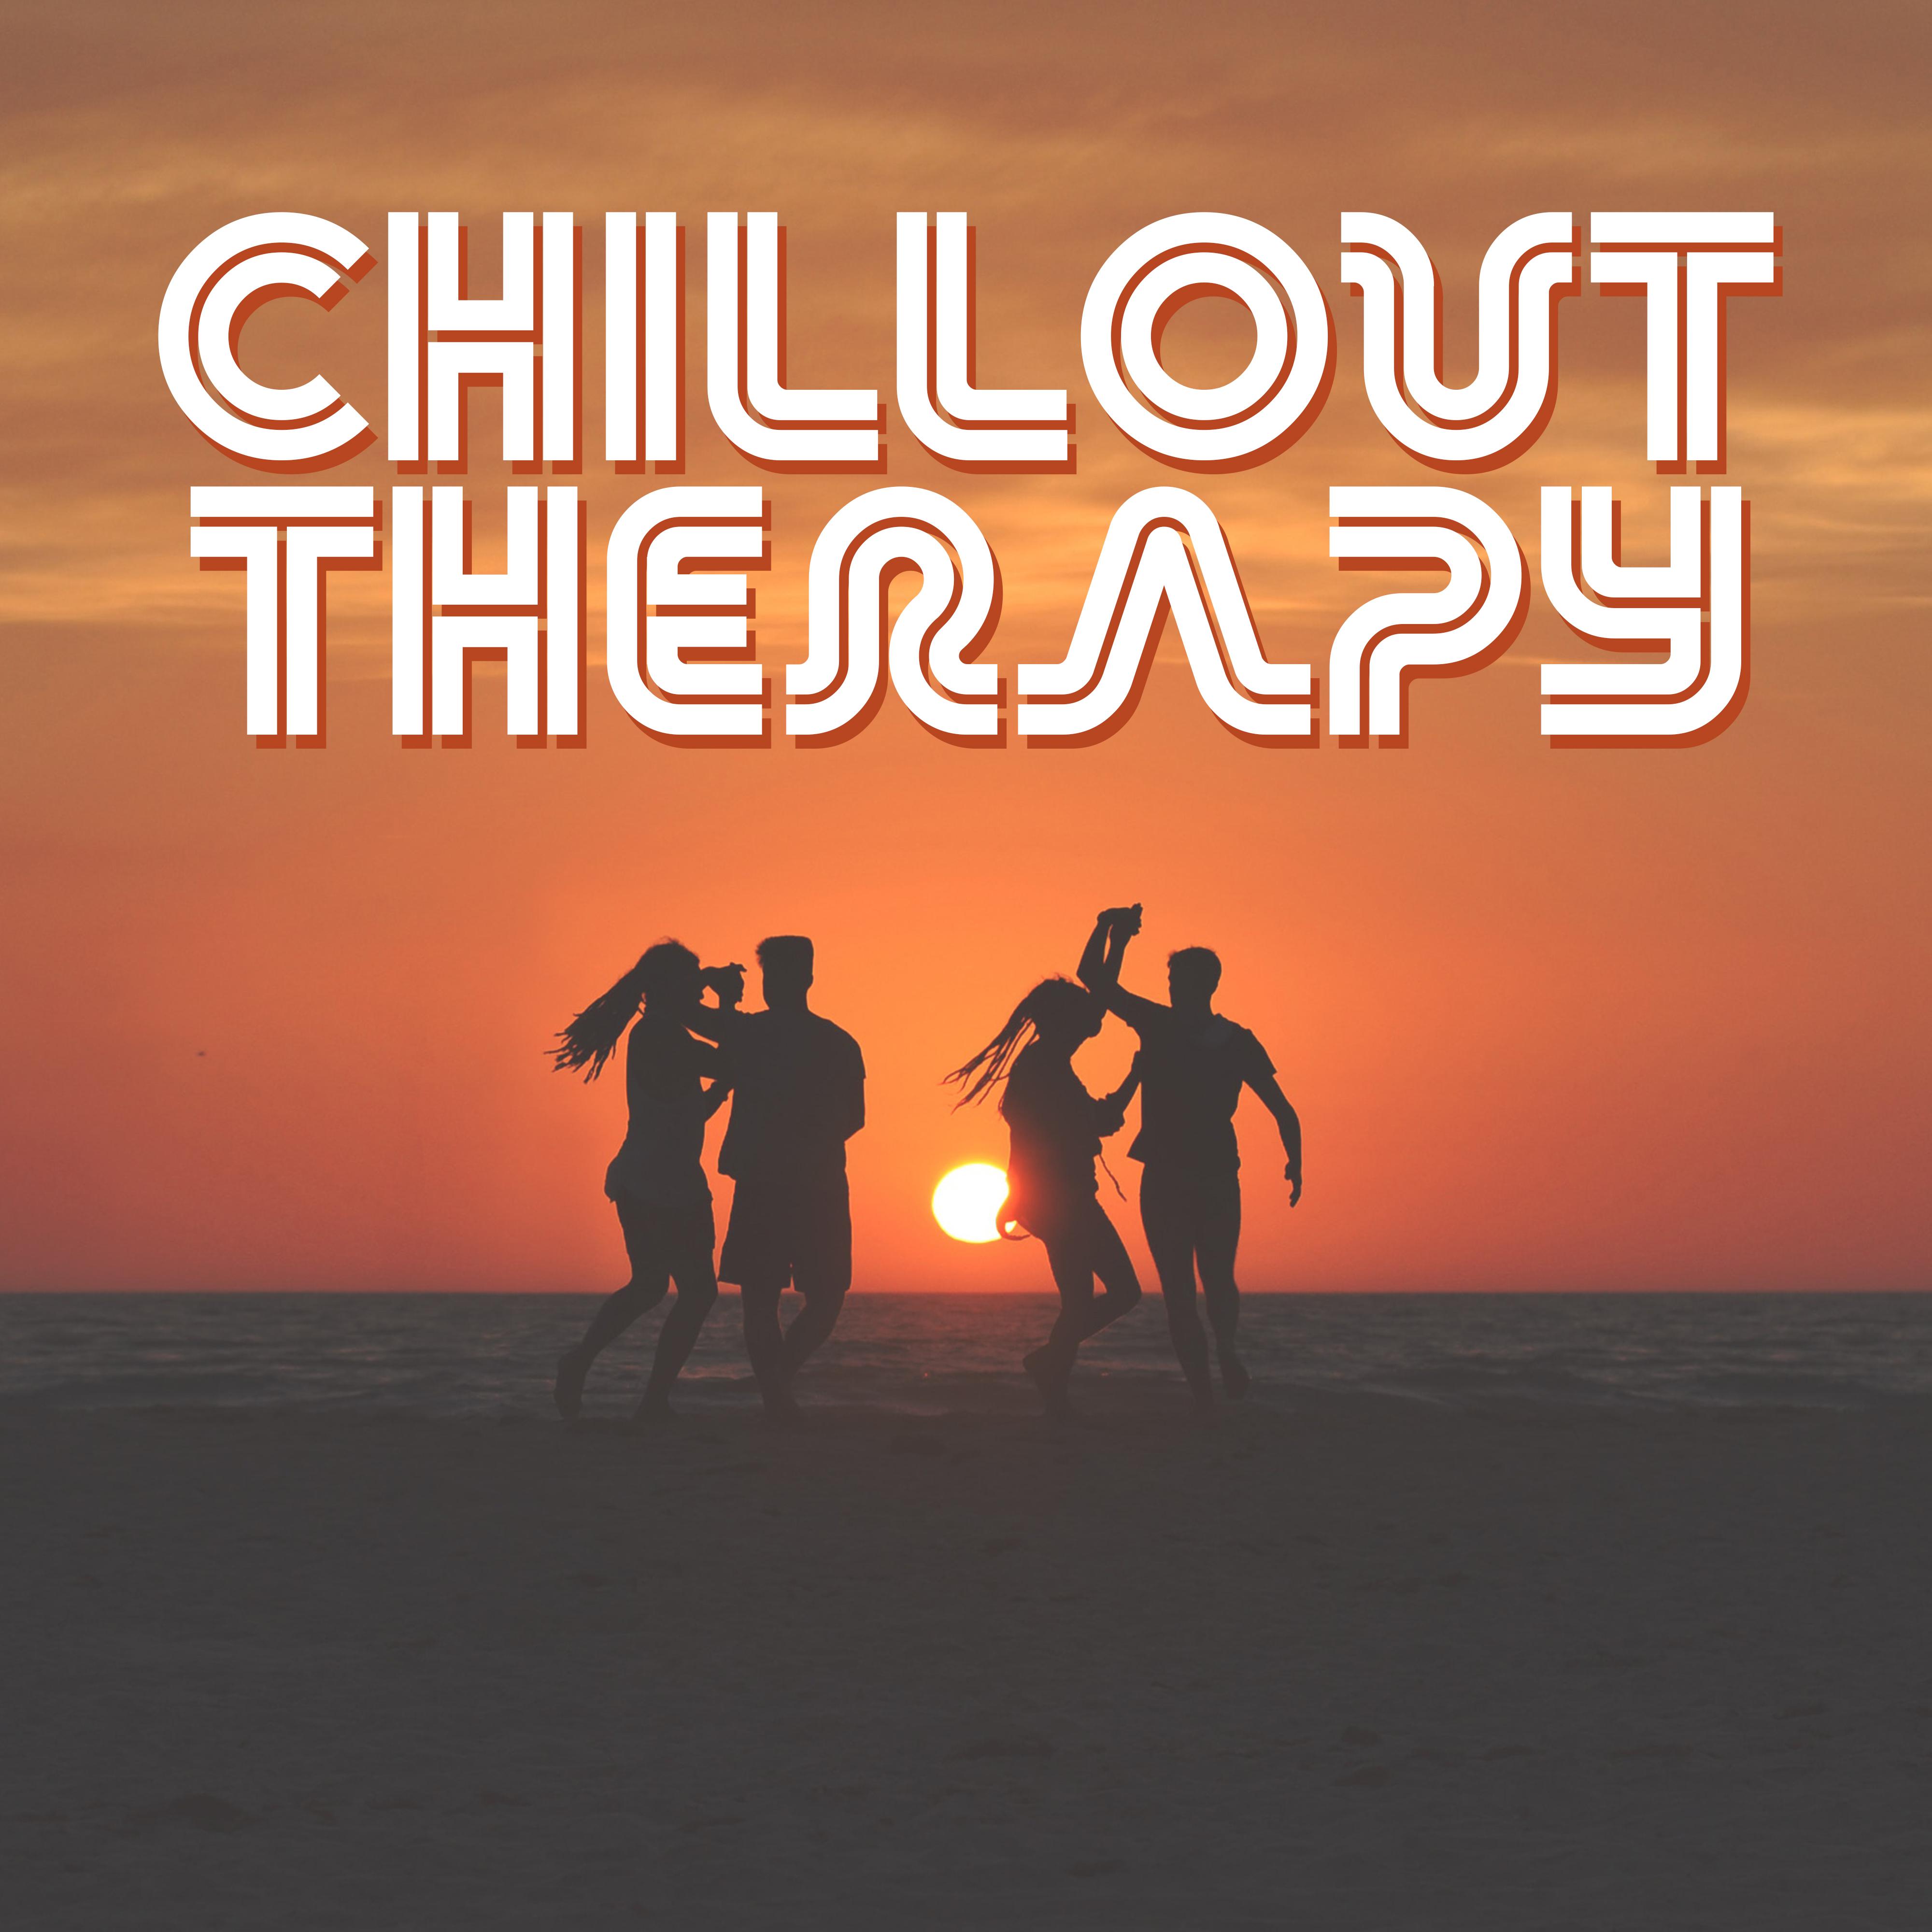 Chillout Therapy